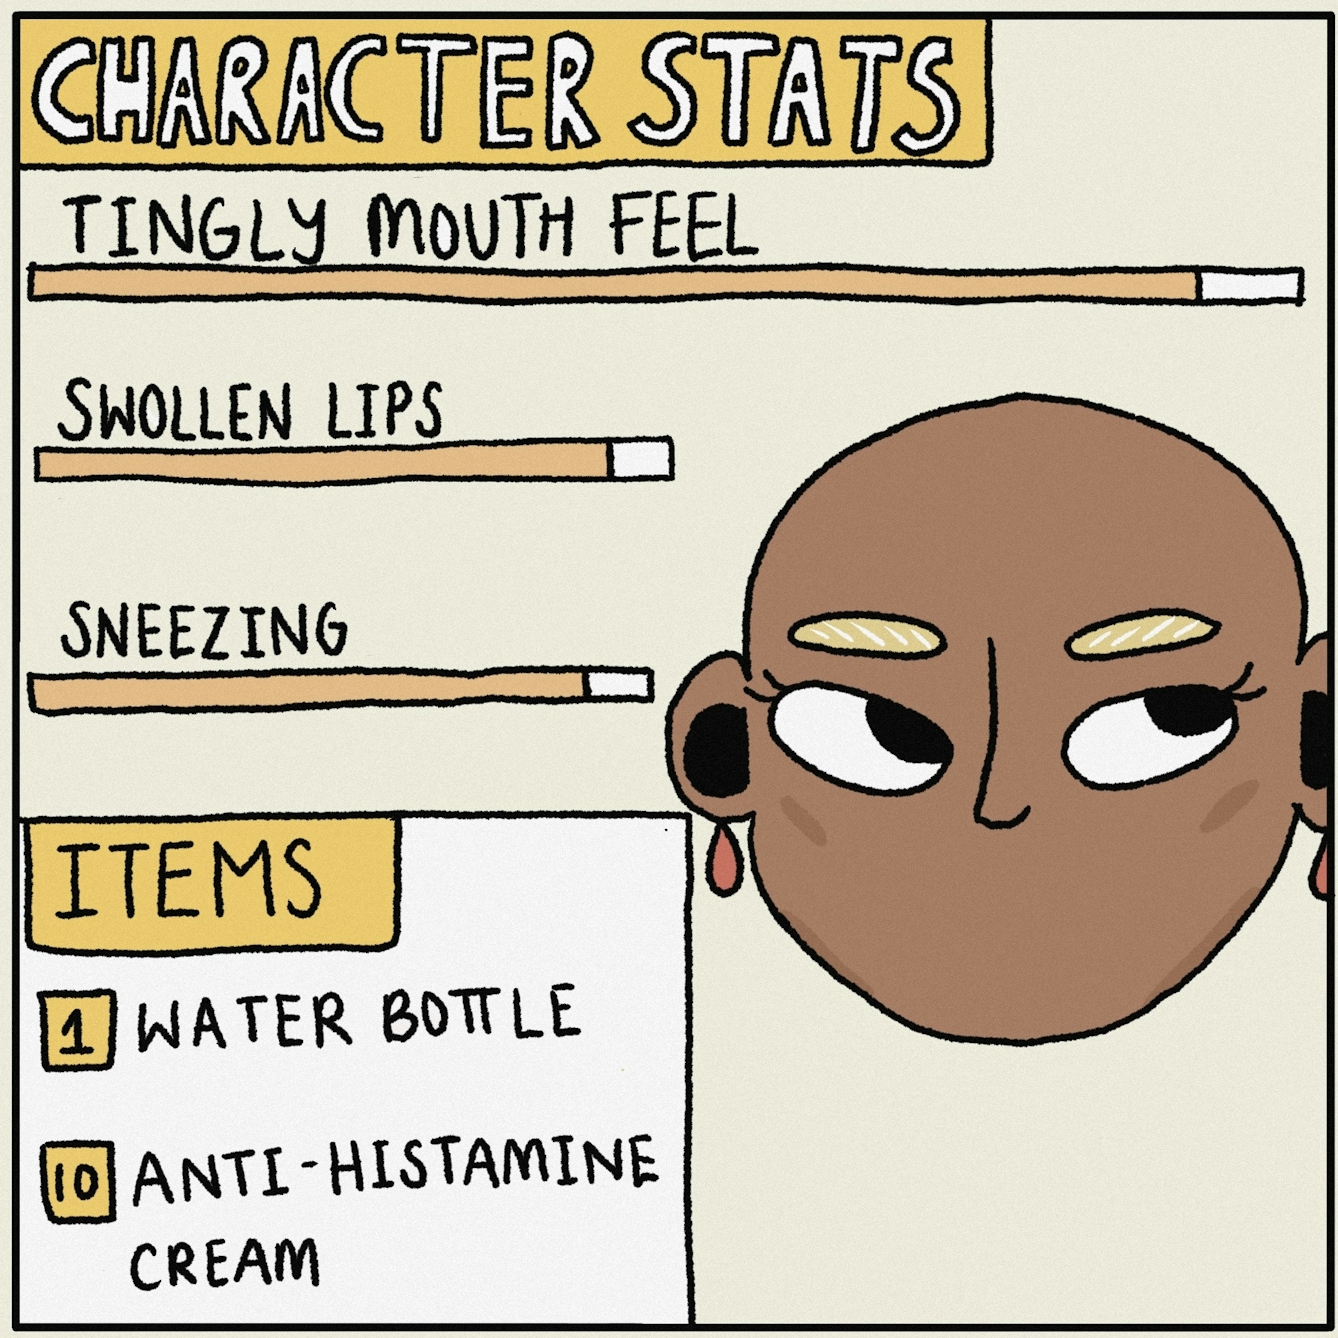 Panel 2 of a digitally drawn, four-panel comic titled ‘Overpowered’. The text at the top says ‘CHARACTER STATS’. The sliders show your character suffers badly with tingly mouth feel, swollen lips and sneezing, and carries a water bottle and antihistamines. 